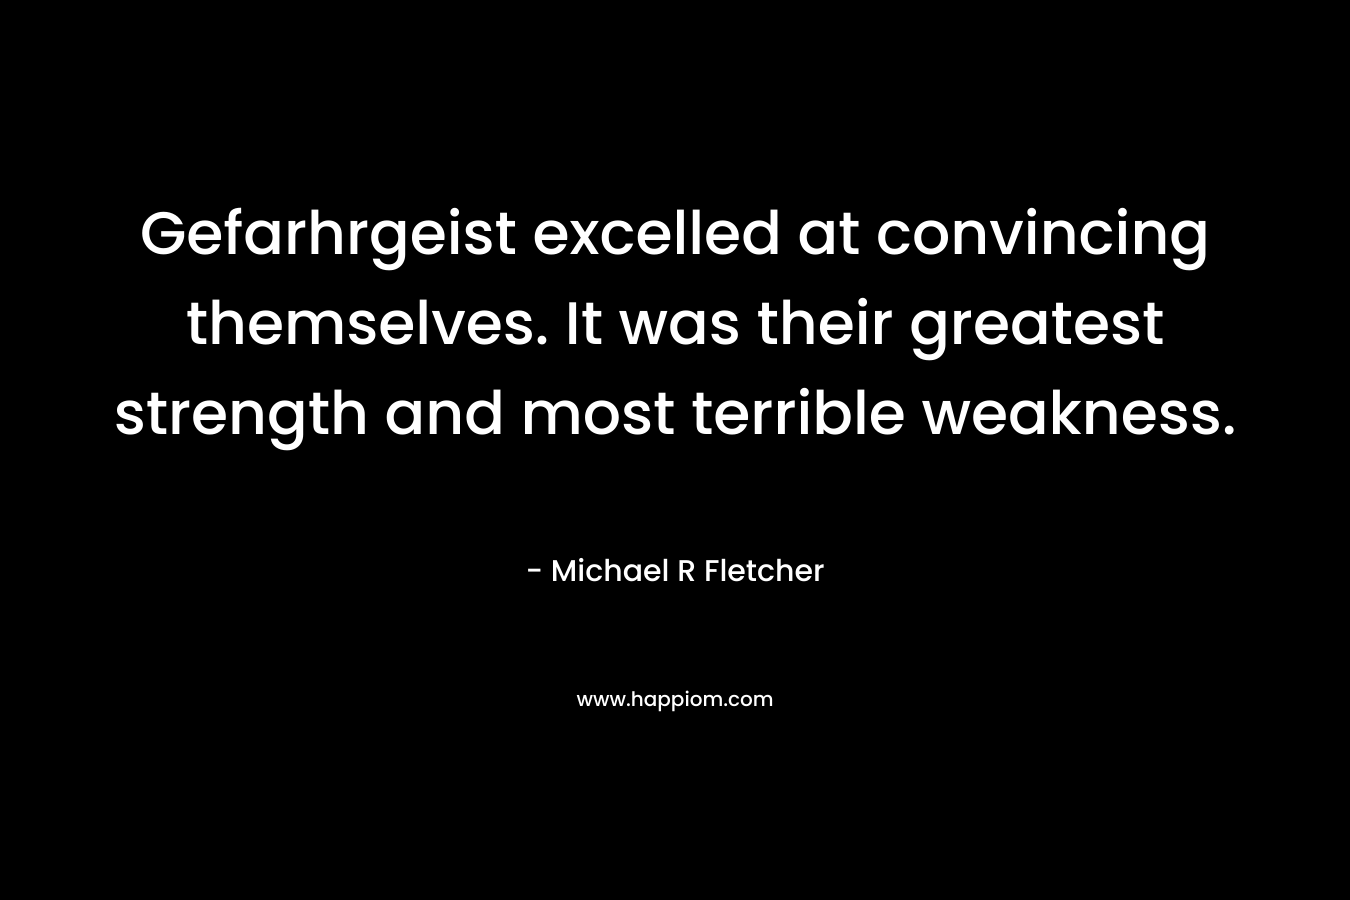 Gefarhrgeist excelled at convincing themselves. It was their greatest strength and most terrible weakness. – Michael R Fletcher